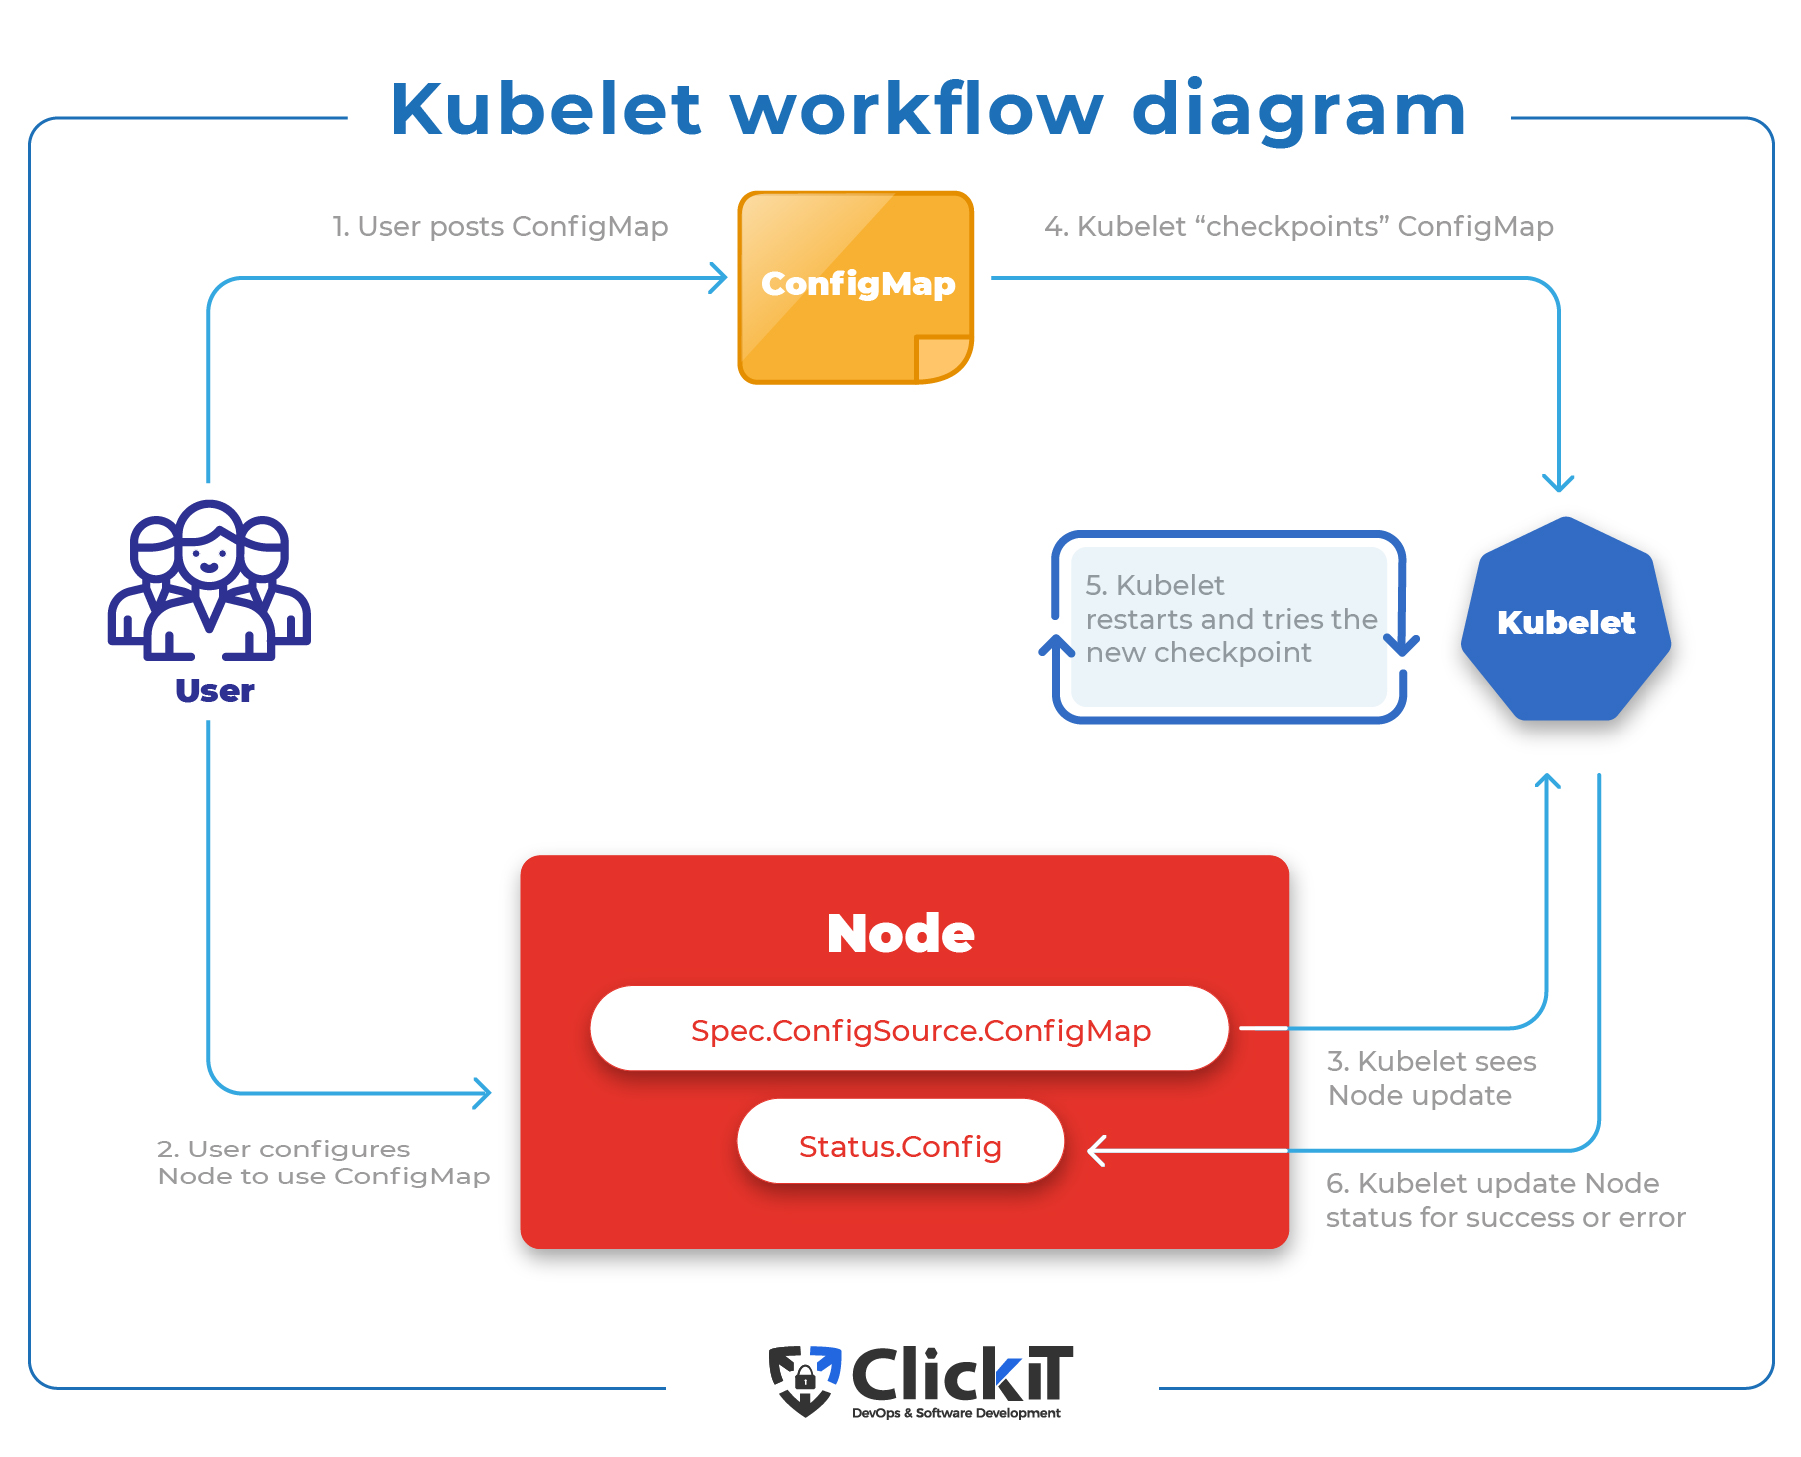 Control Planes and Worker Nodes: How to Install Kubernetes⚓️ and